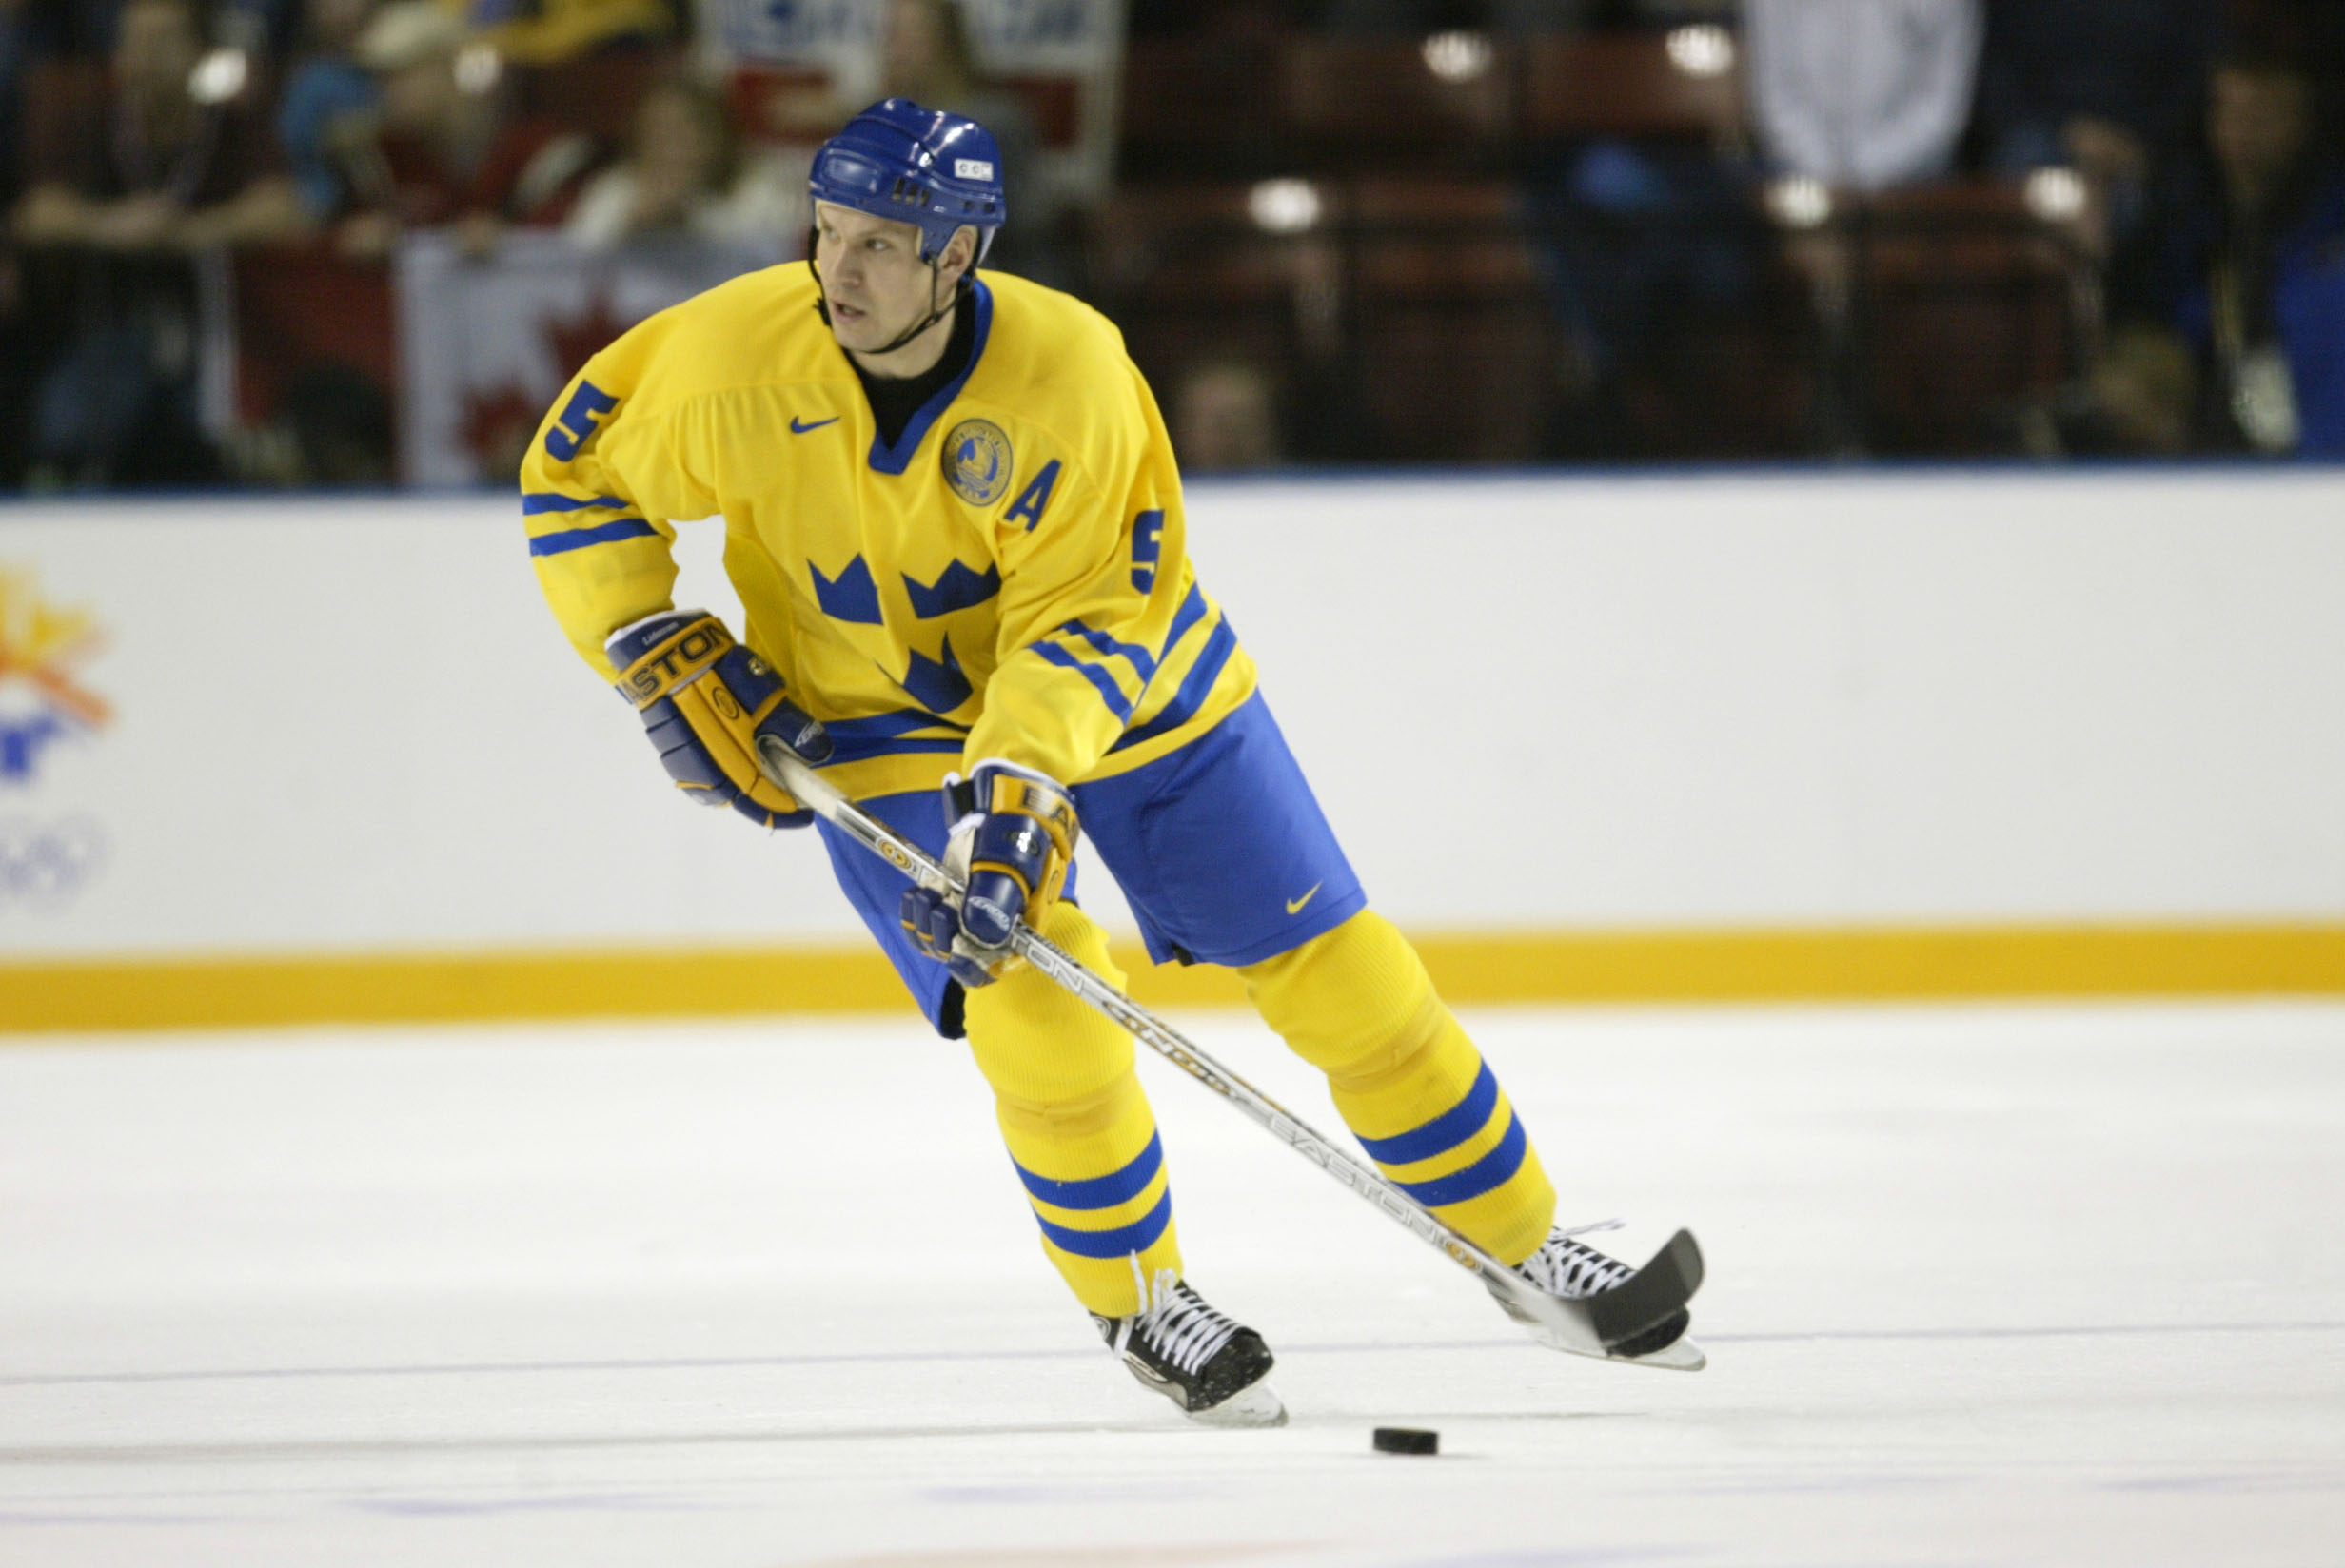 15 Feb 2002:    As he skates down the ice, Nicklas Lidstrom #5 of Sweden looks to pass the puck during the Salt Lake City Winter Olympic Games at the E Center in Salt Lake City, Utah. DIGITAL IMAGE. Mandatory Credit:   Brian Bahr/Getty Images